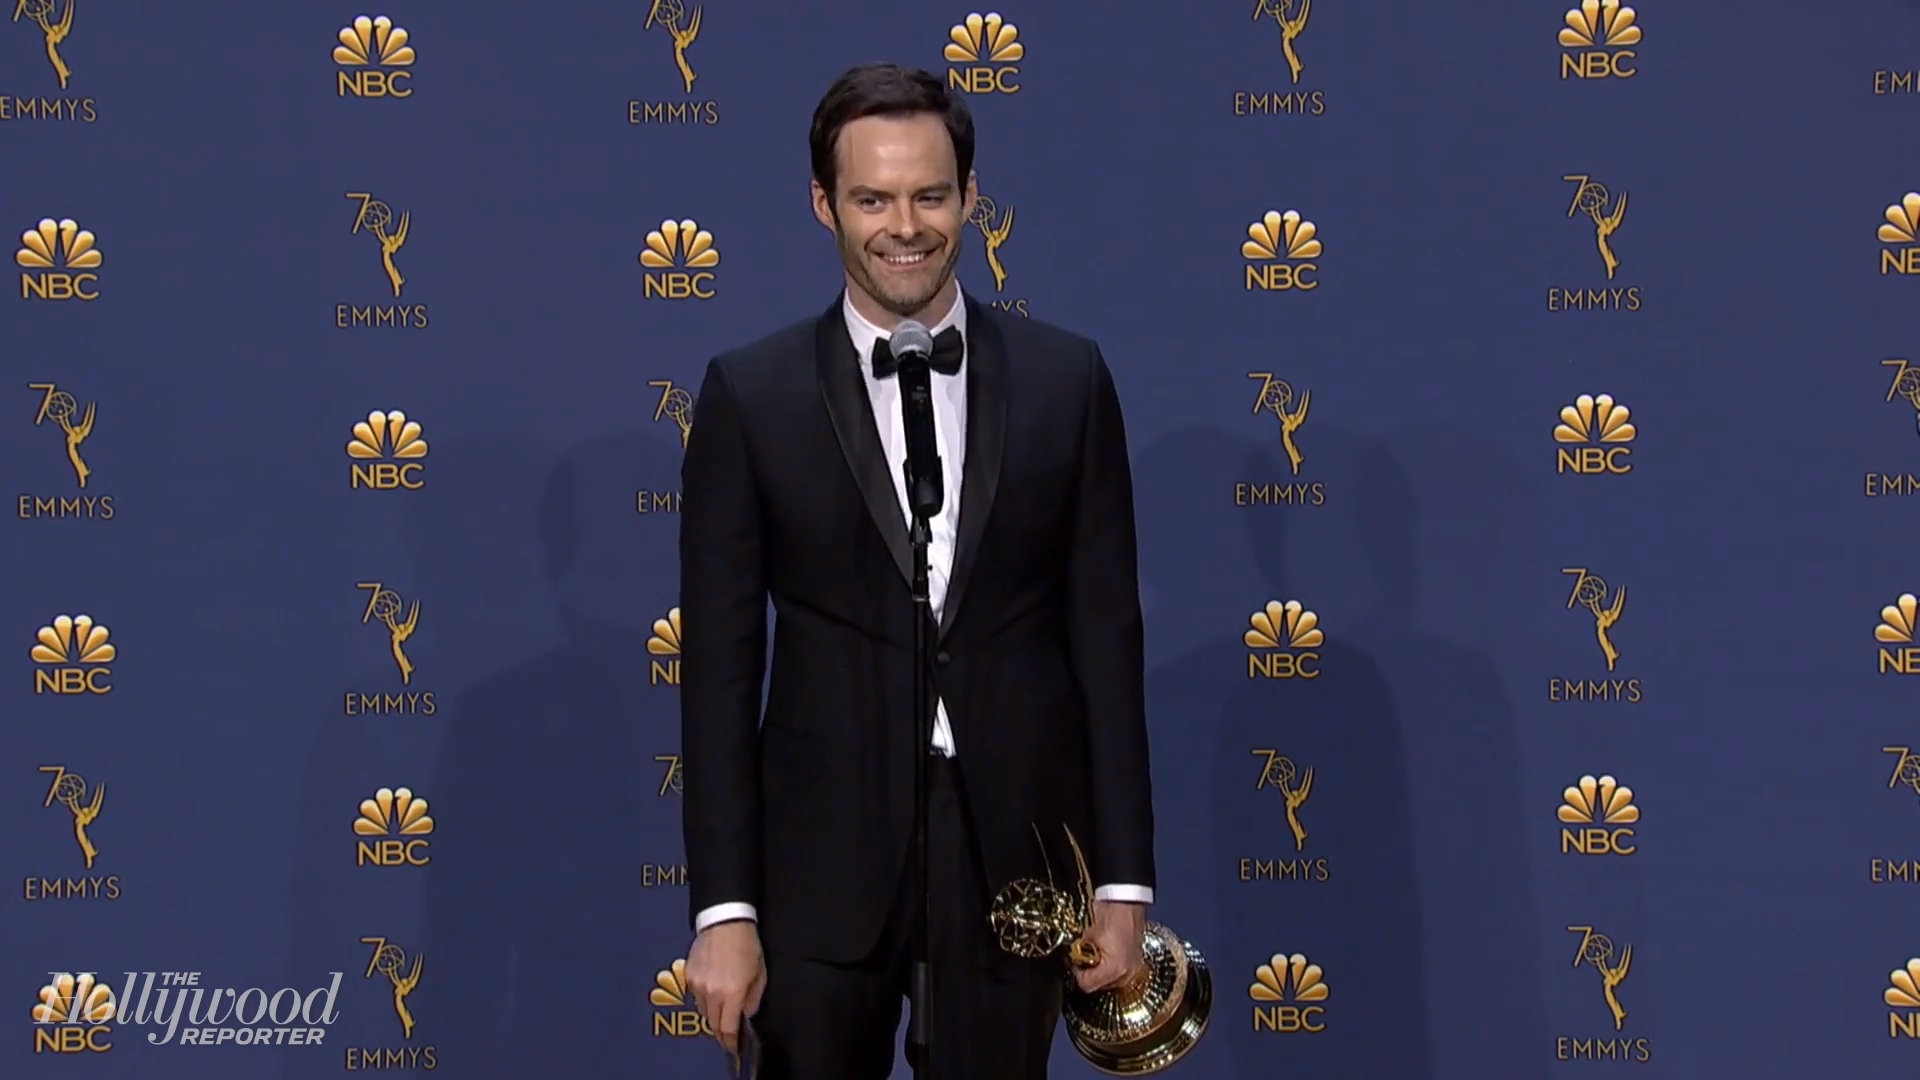 Bill Hader On Emmys Acceptance Speech: "I Legit Don’t Know What I Said Up There" | Emmys 2018